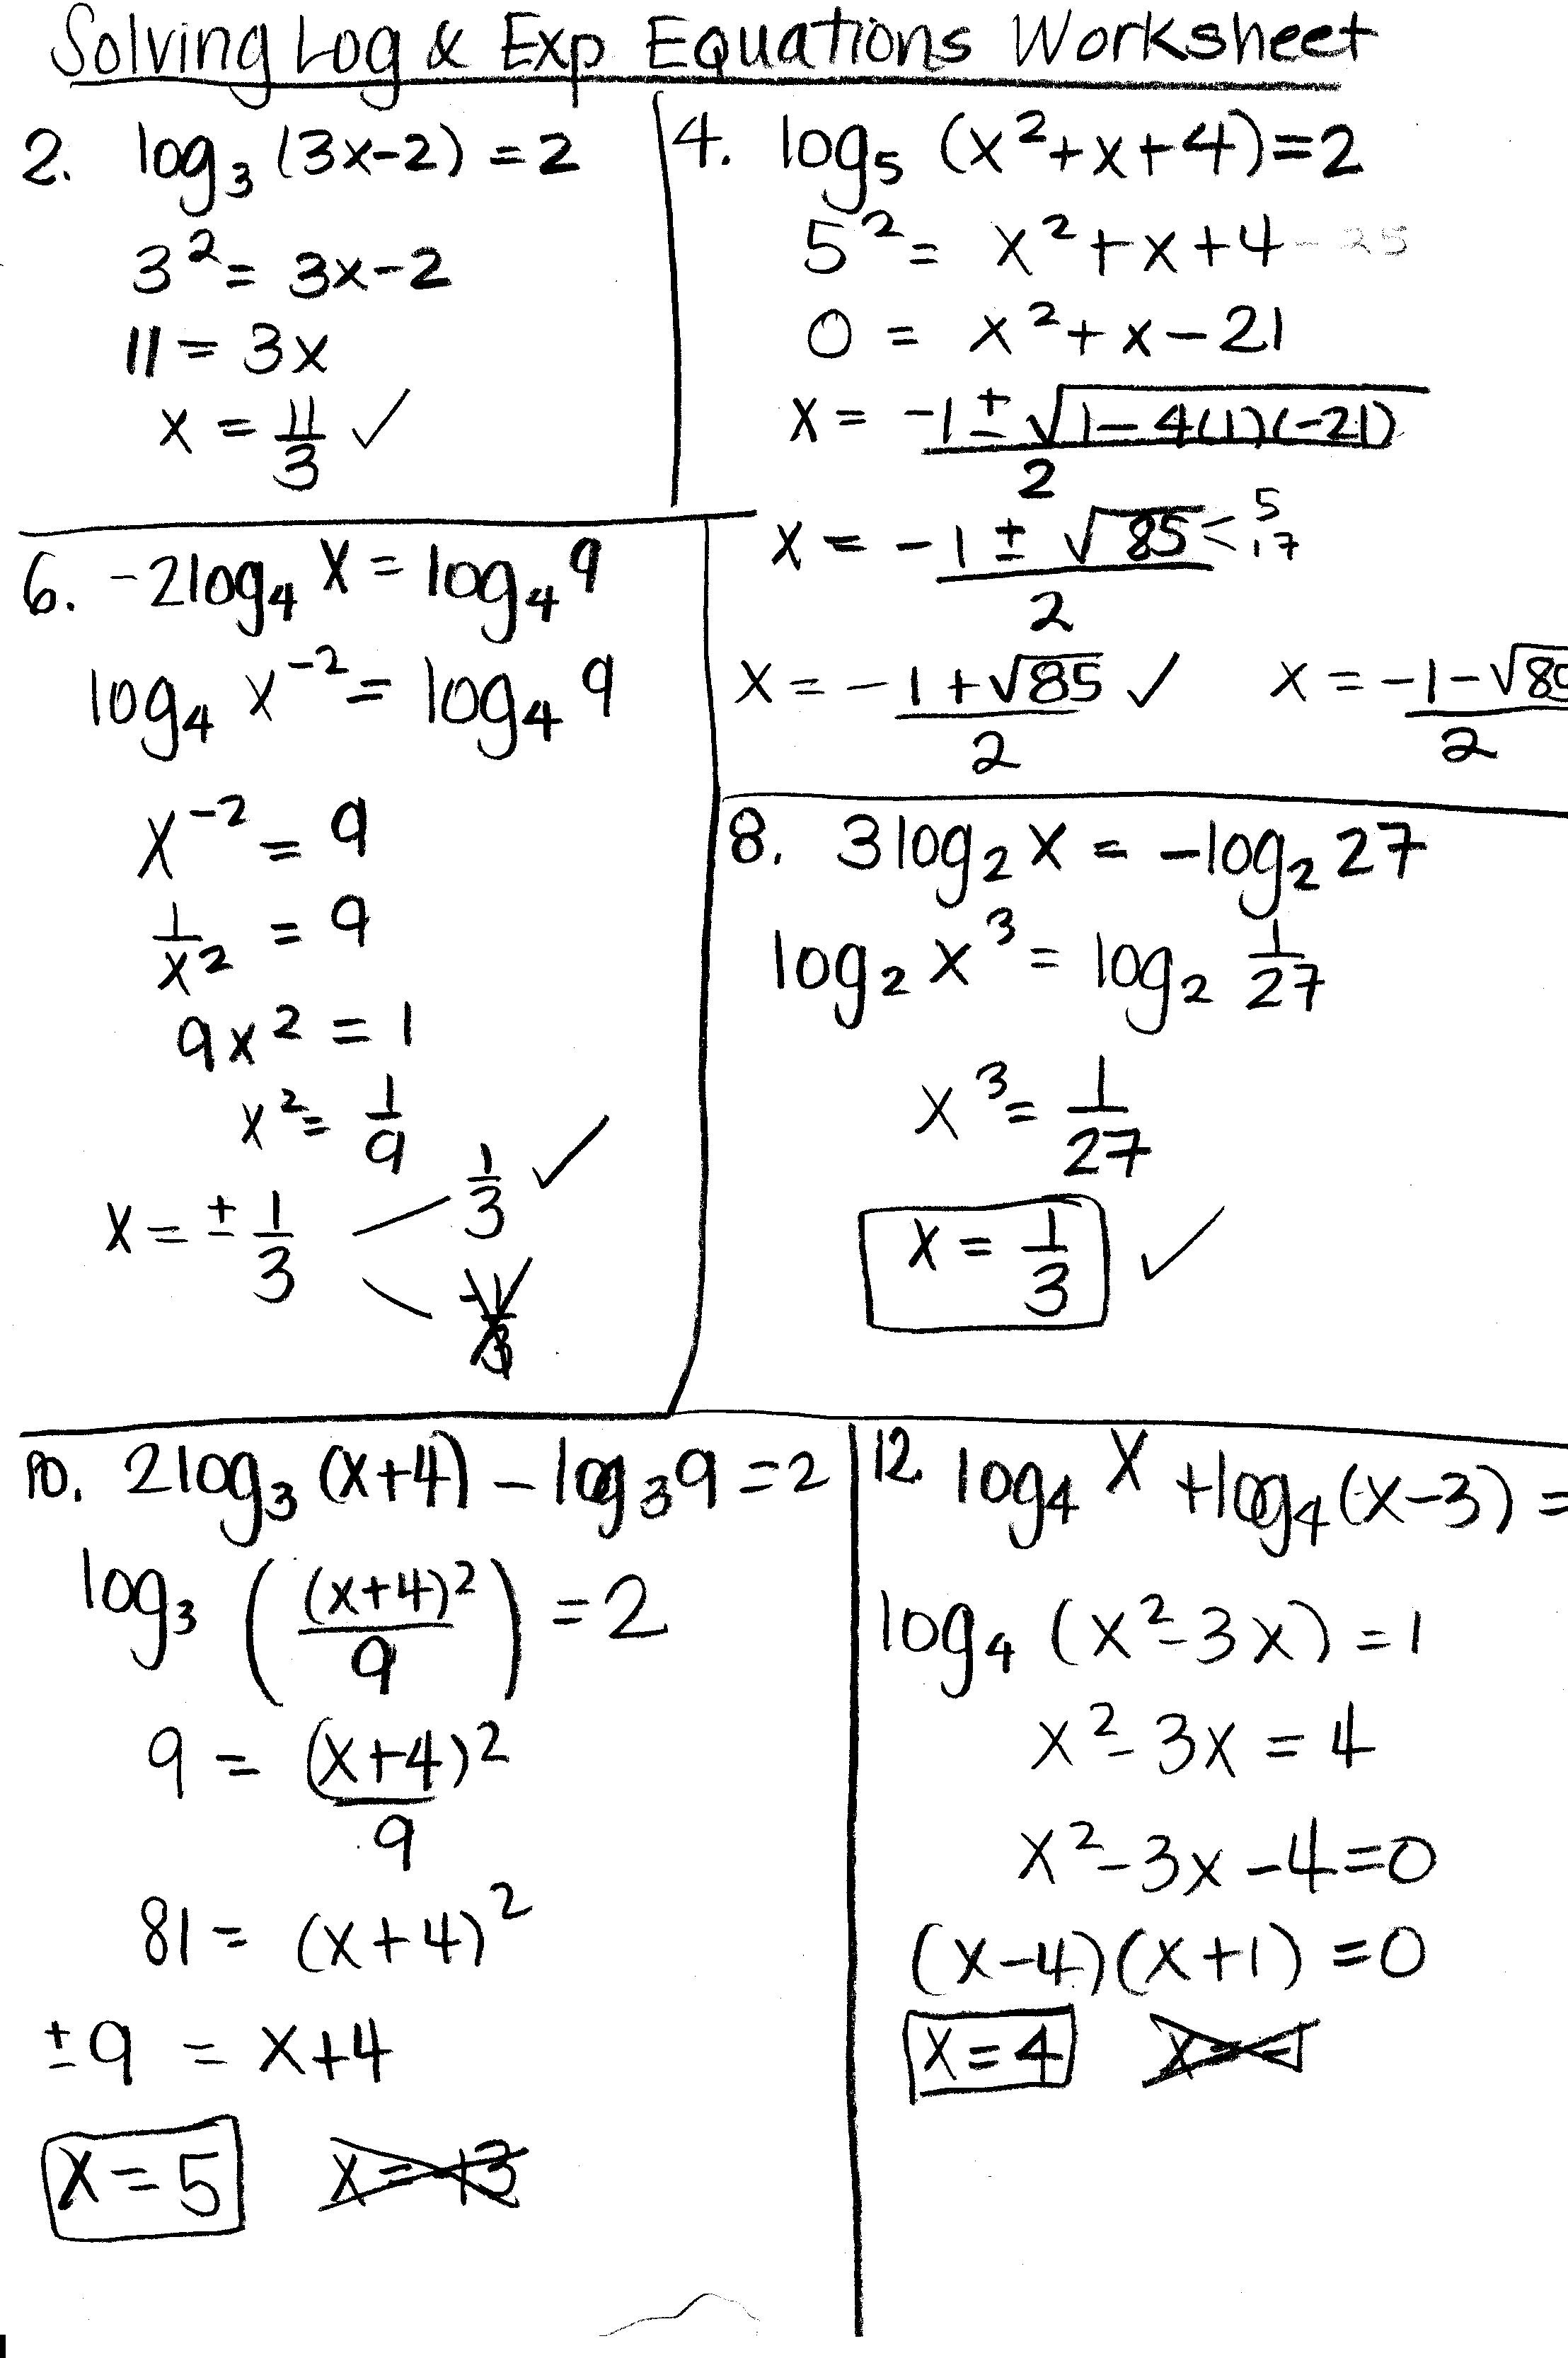 properties-of-logarithms-worksheet-answers-properties-of-logarithms-lesson-distance-learning